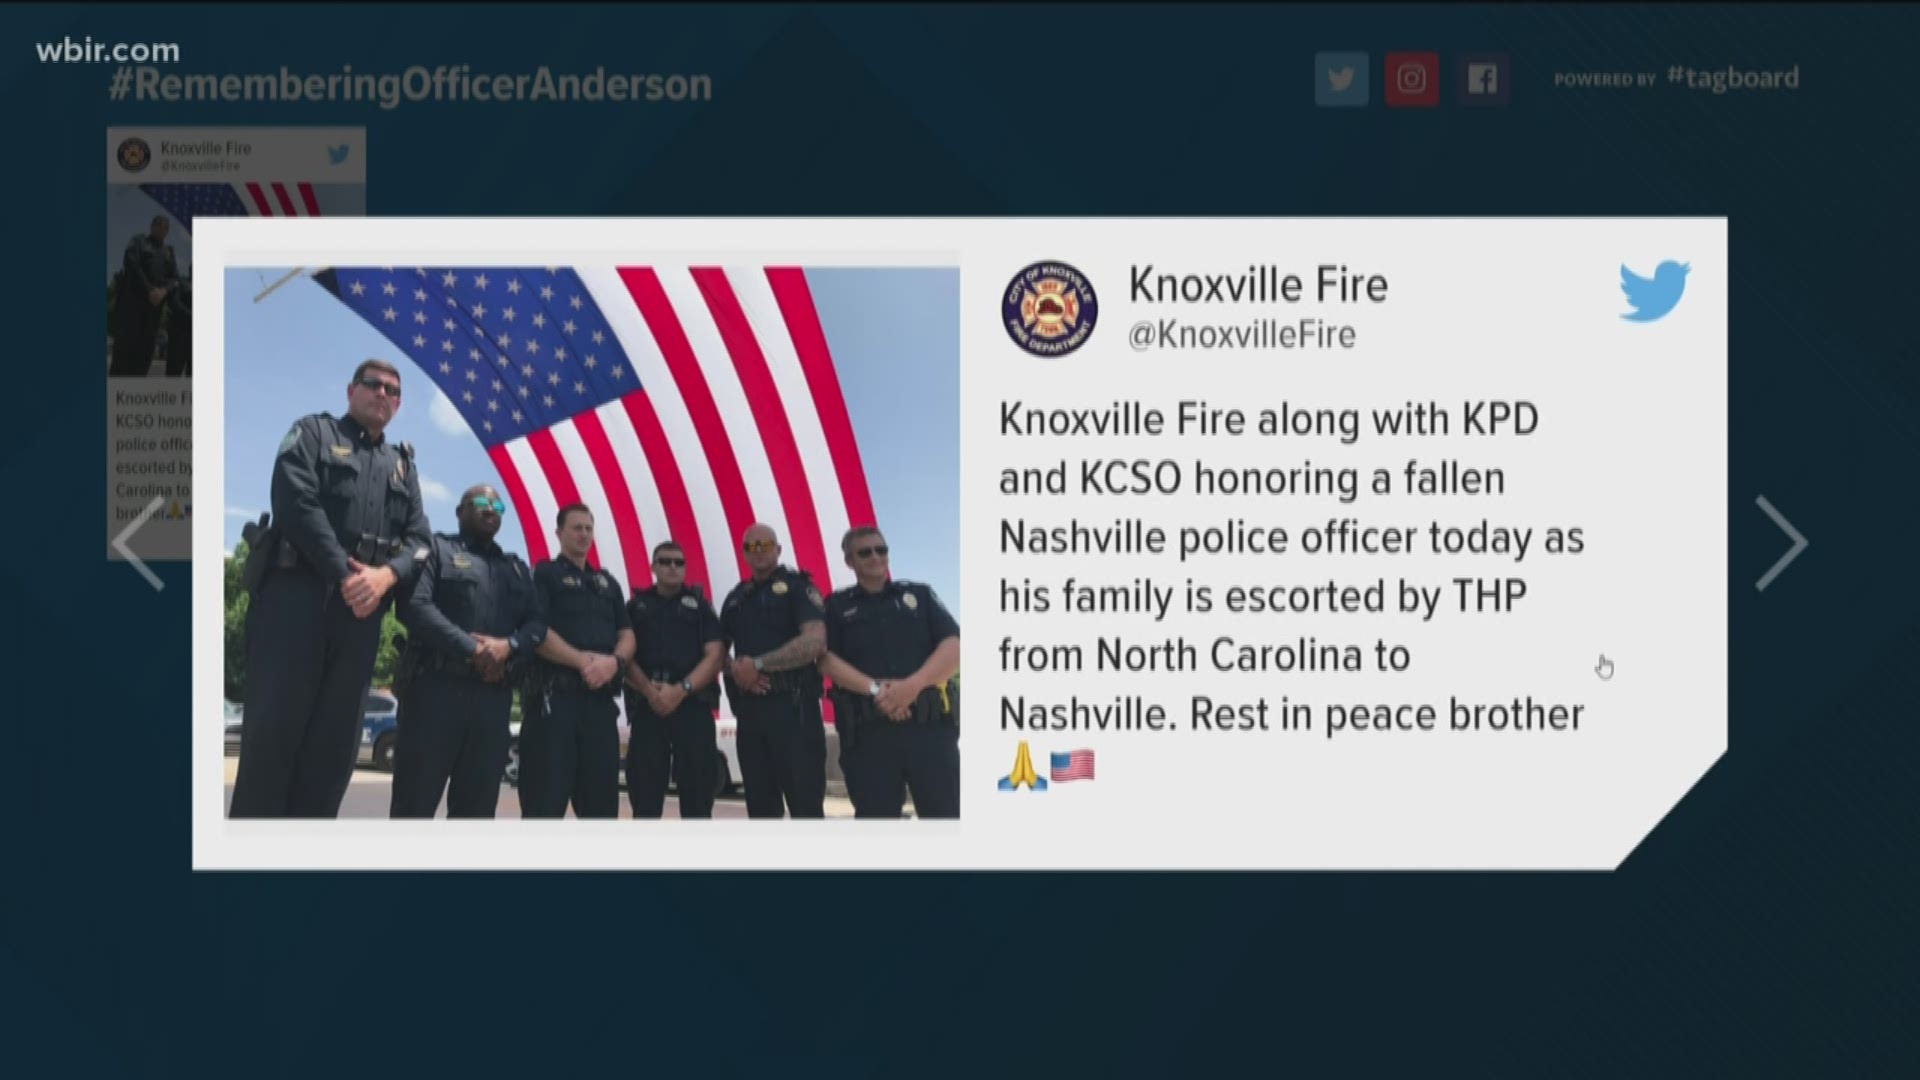 Knoxville Police Department and the Knox County Sheriff's Office assisted in escorting Officer Anderson's family from North Carolina to Tennessee.